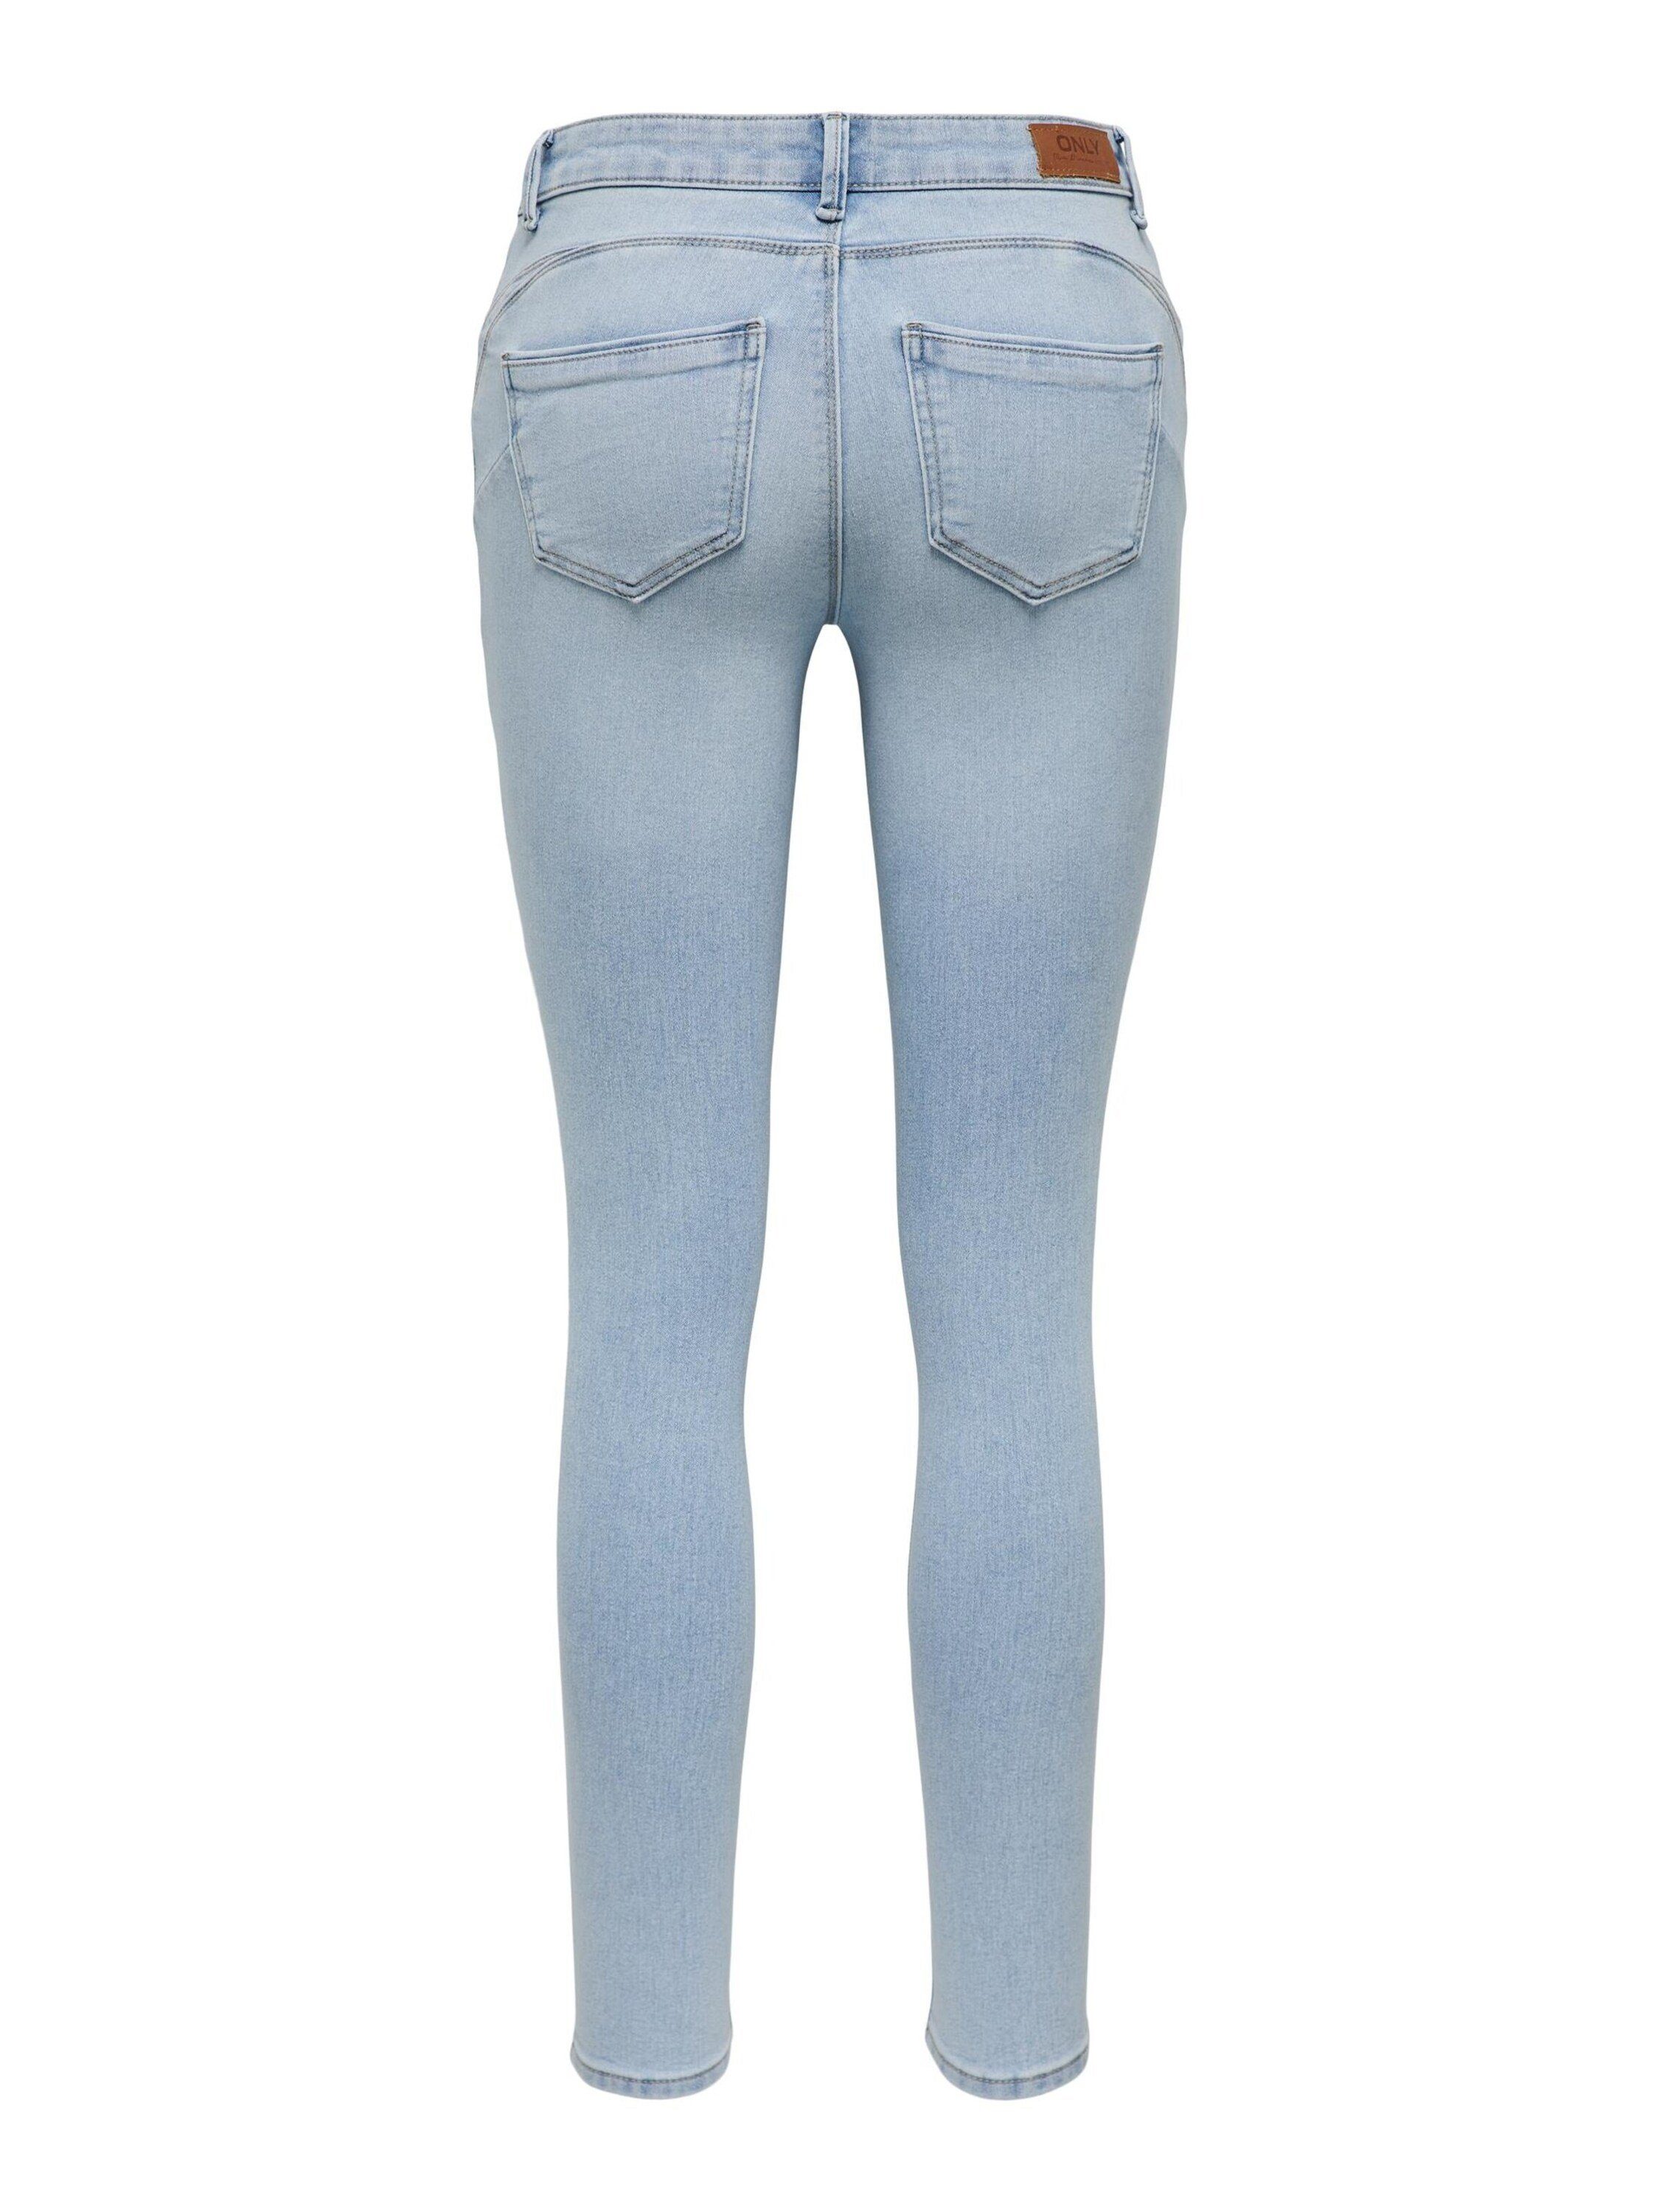 DAISY (1-tlg) Plain/ohne ONLY Details Skinny-fit-Jeans